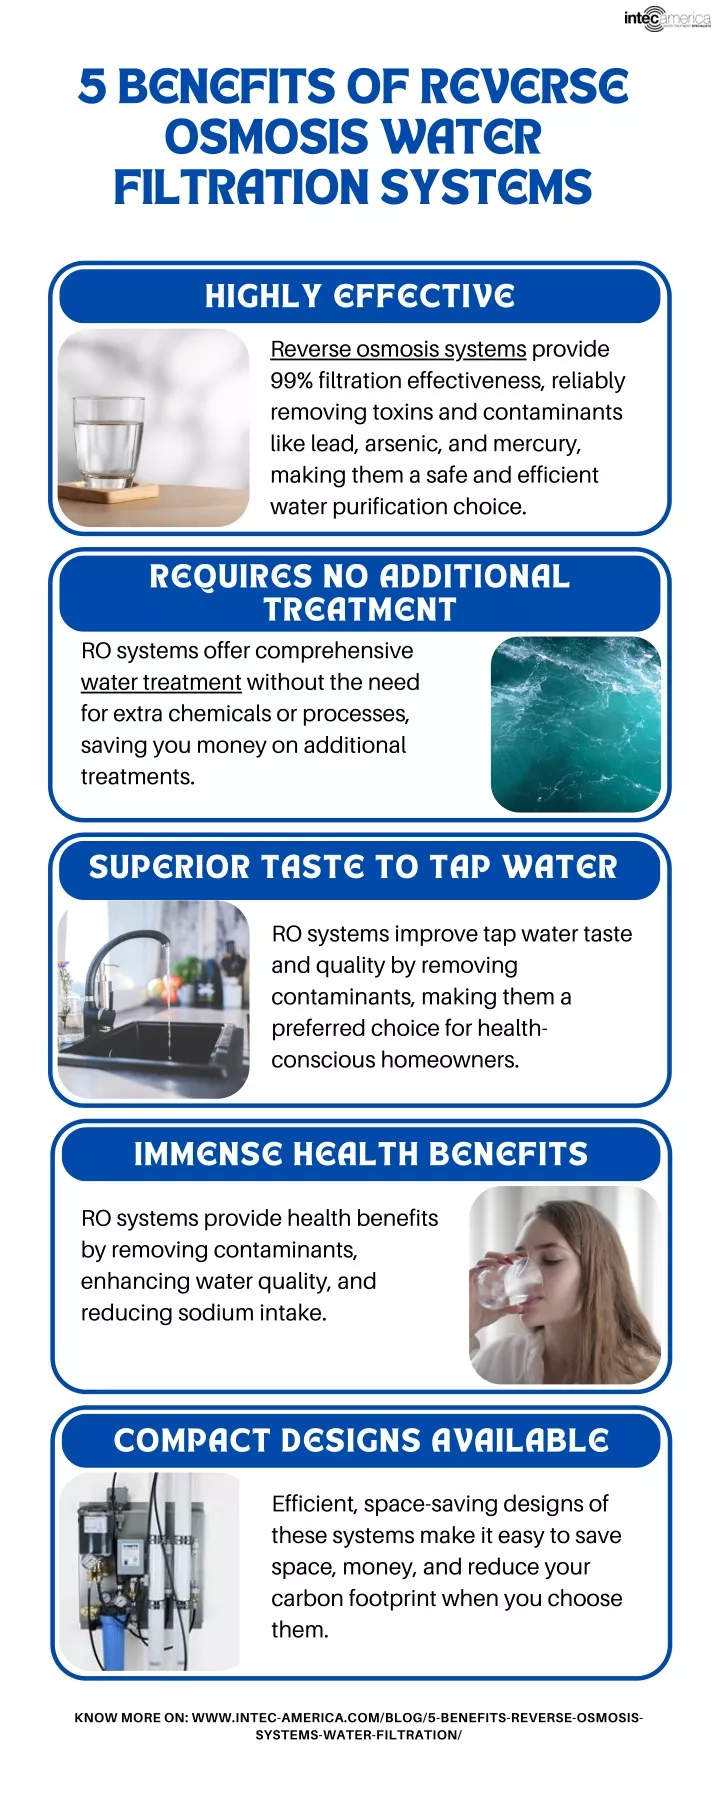 5 benefits of reverse osmosis water filtration